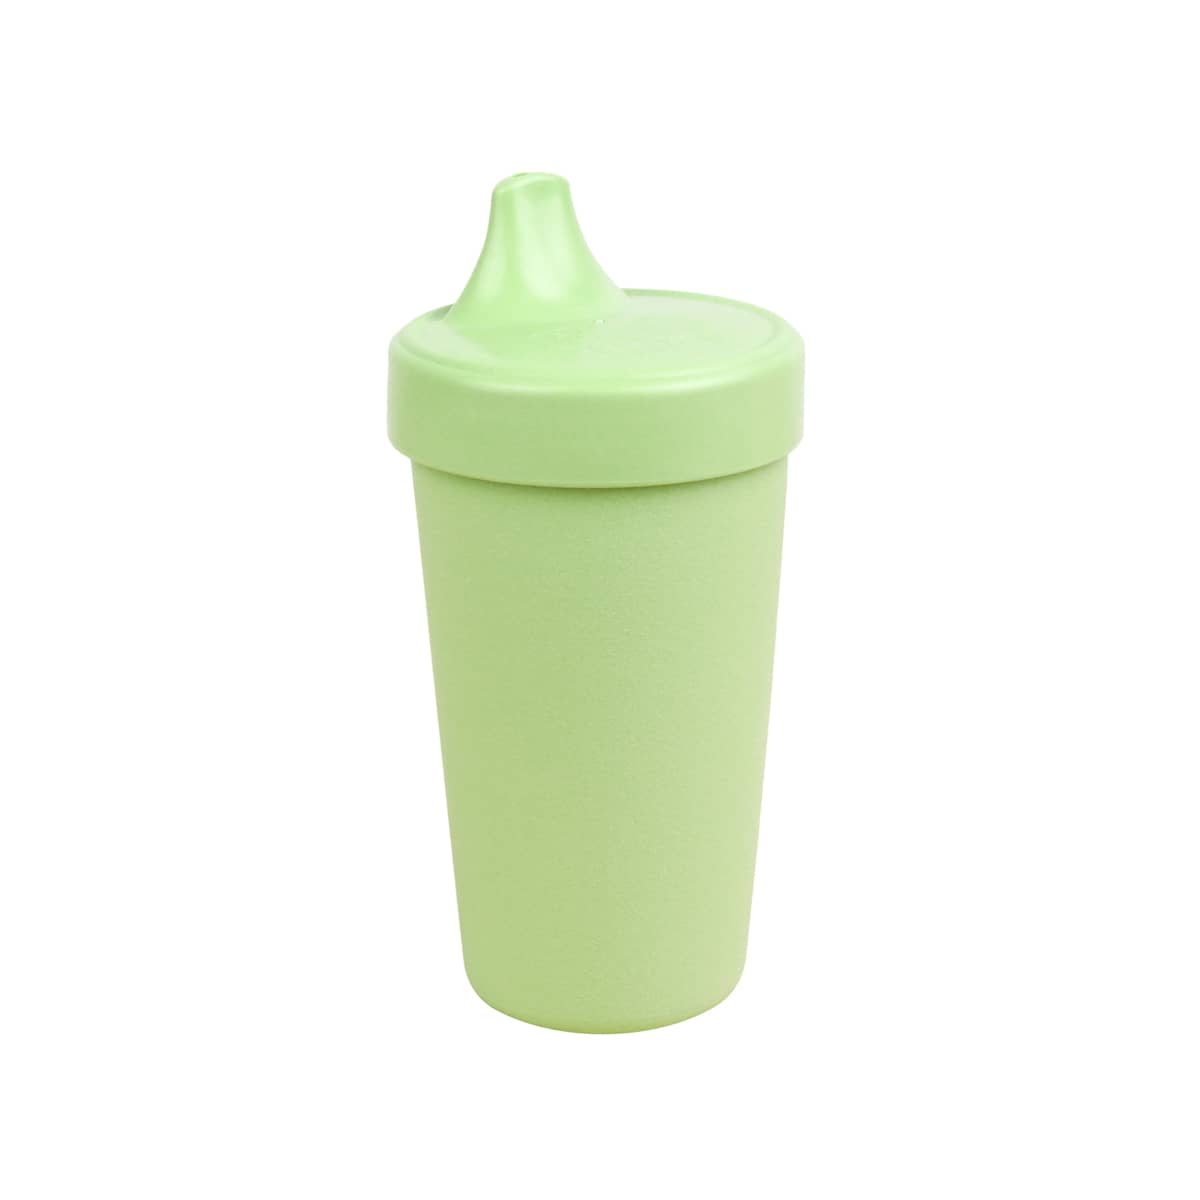 Re-Play Recycled No-Spill Sippy Cup - Leaf Green